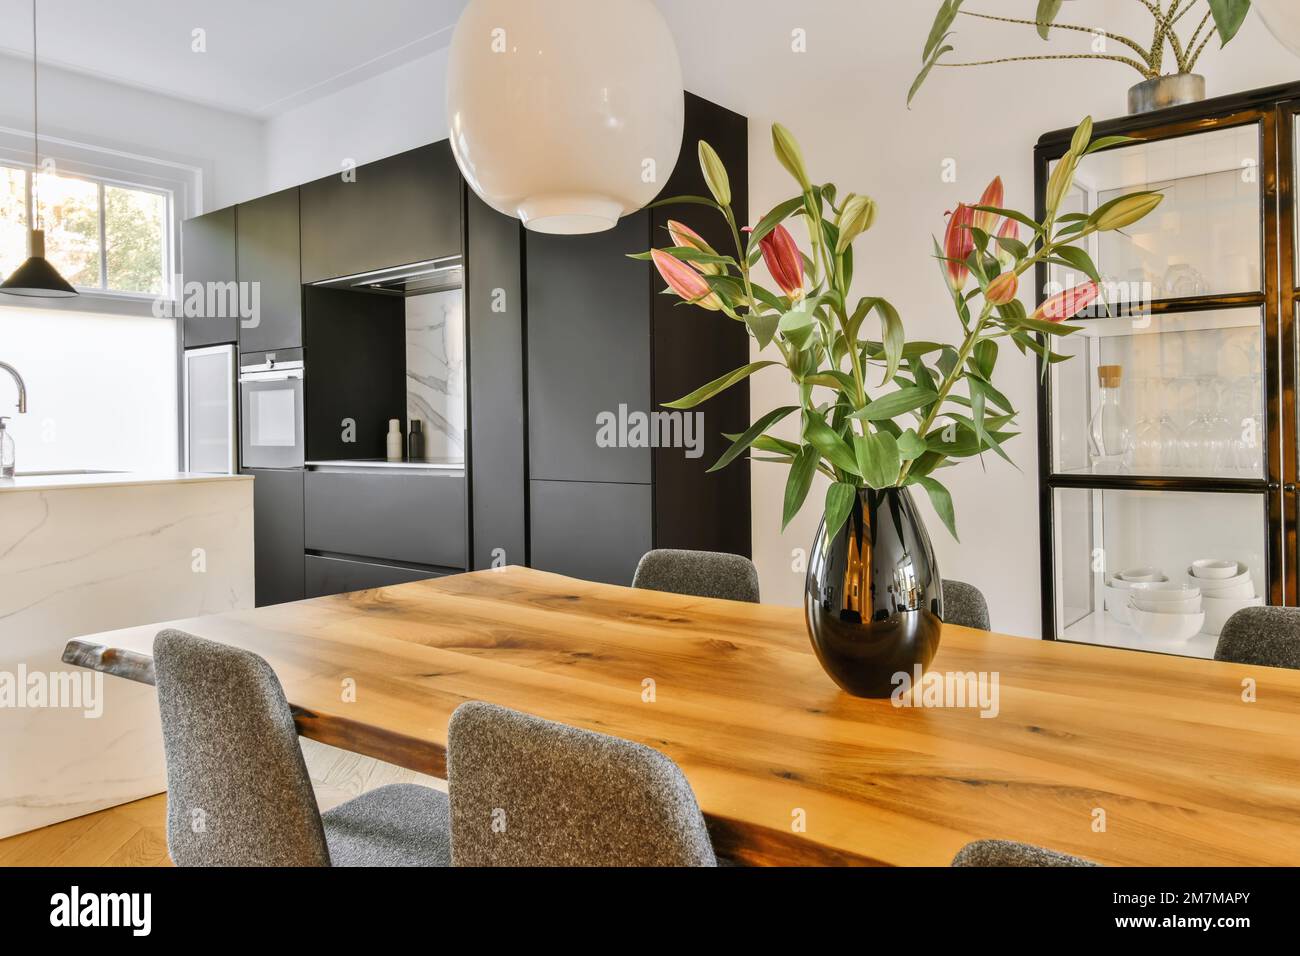 a kitchen and dining area in a modern home with white walls, black cabinets and wooden table surrounded by grey chairs Stock Photo